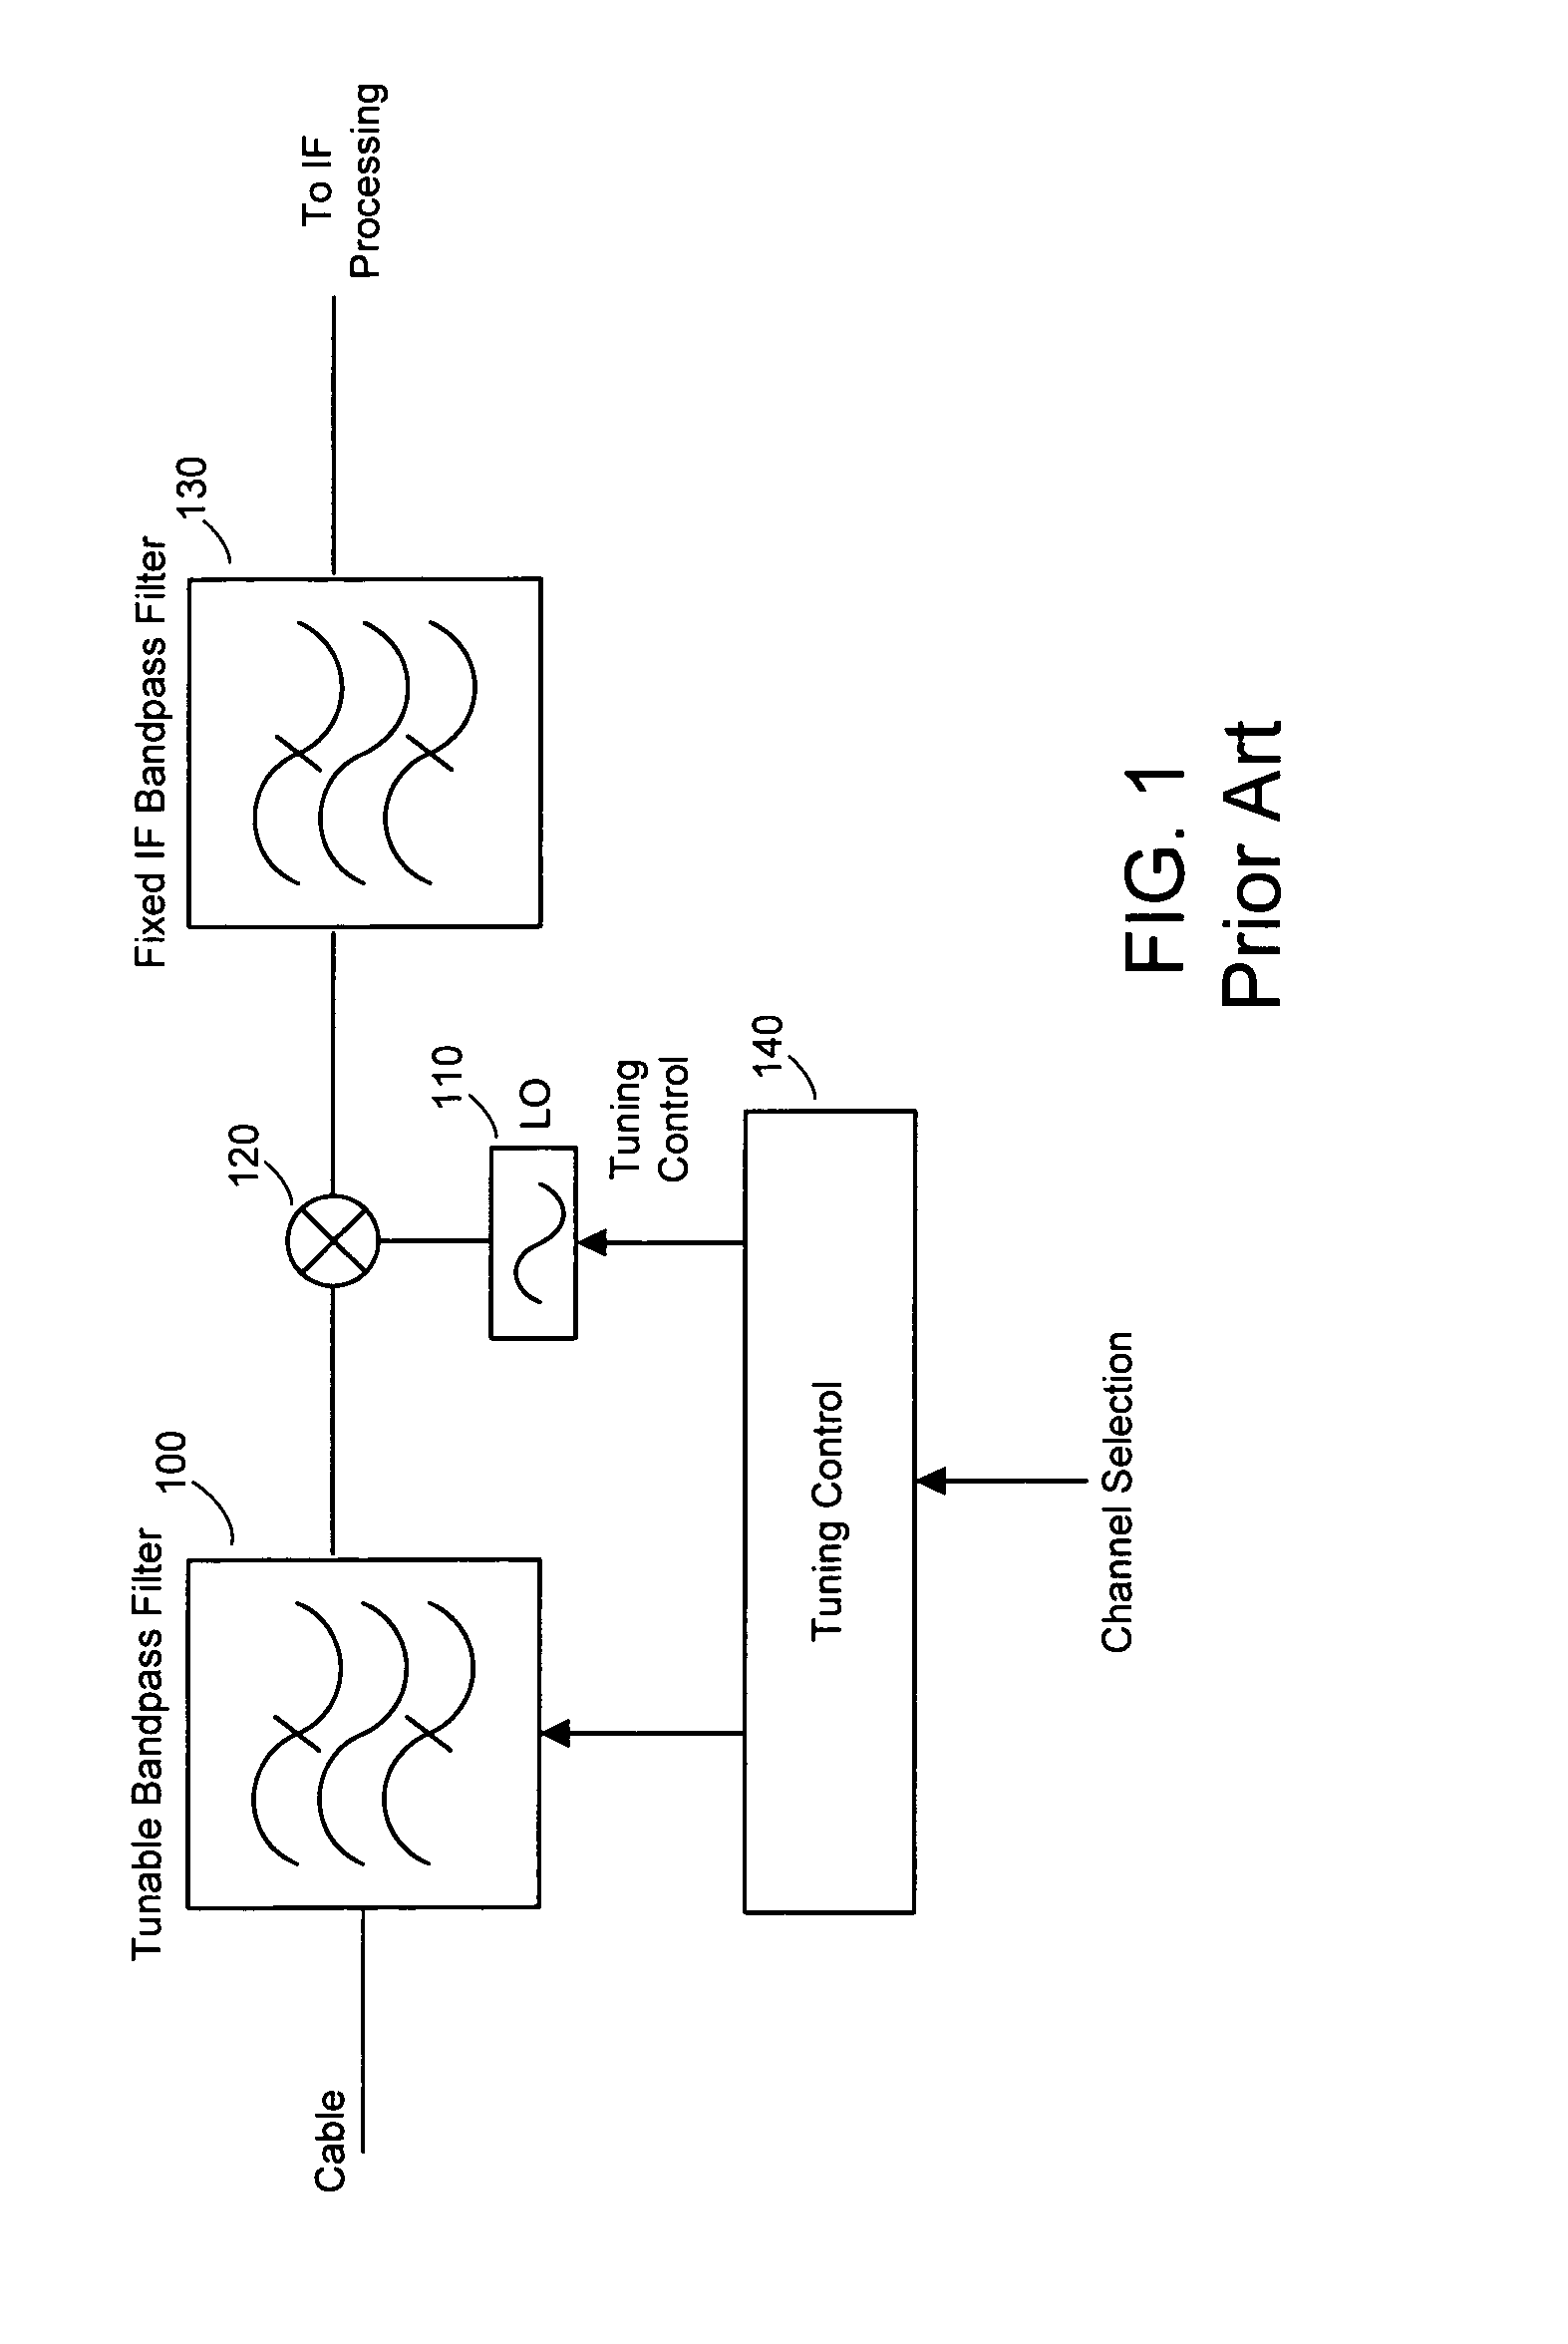 Power spectrum shaping to reduce interference effects in devices sharing a communication medium